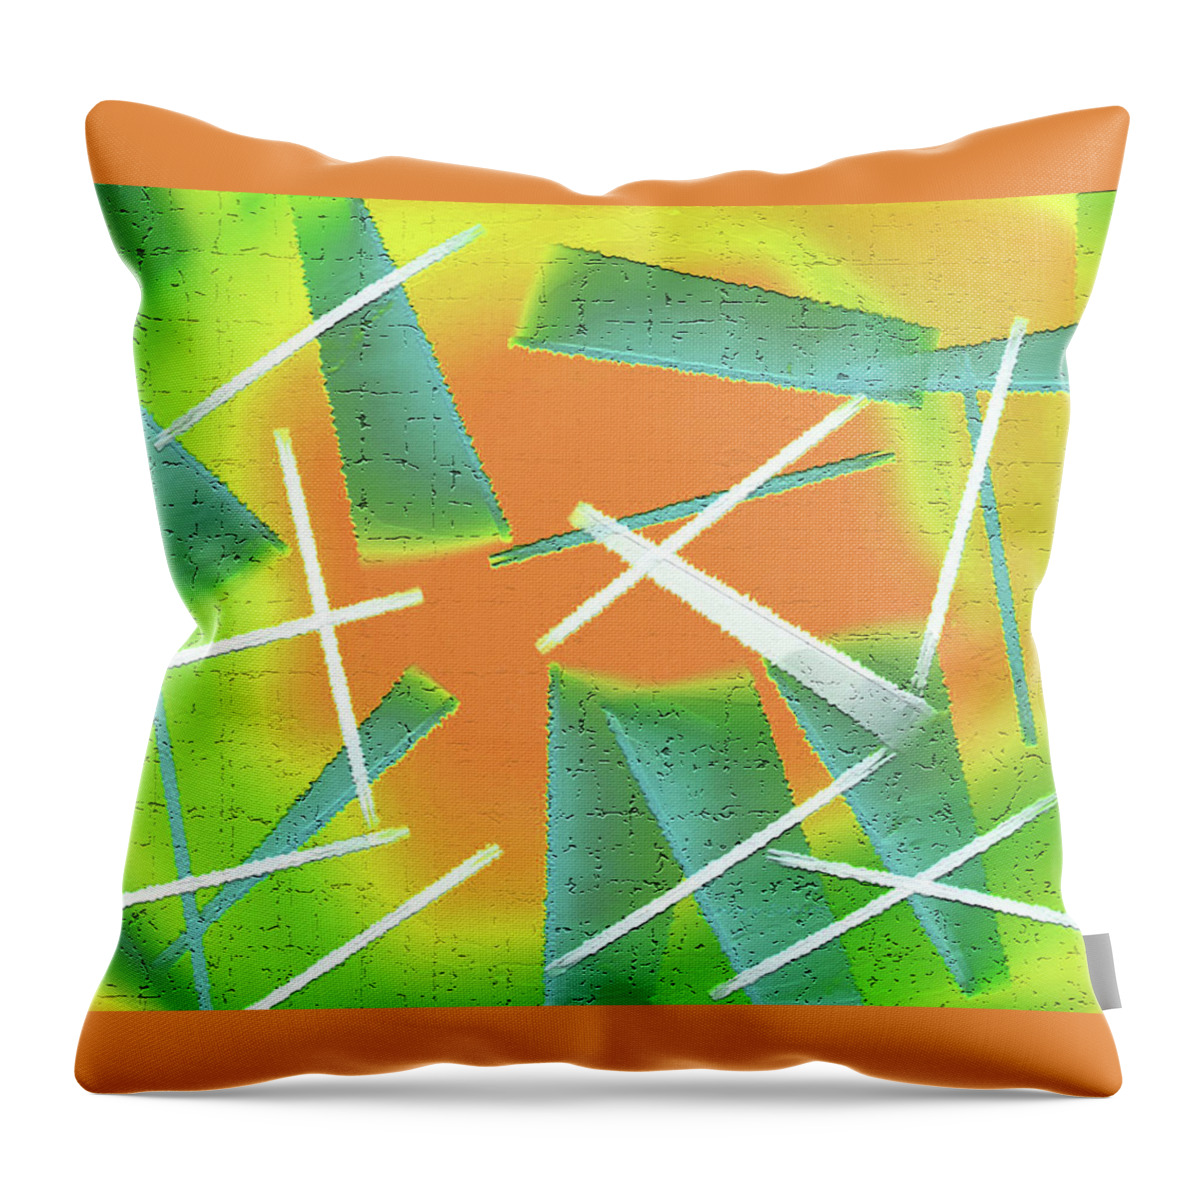 Abstract Throw Pillow featuring the painting Abstract - Saws by Lenore Senior